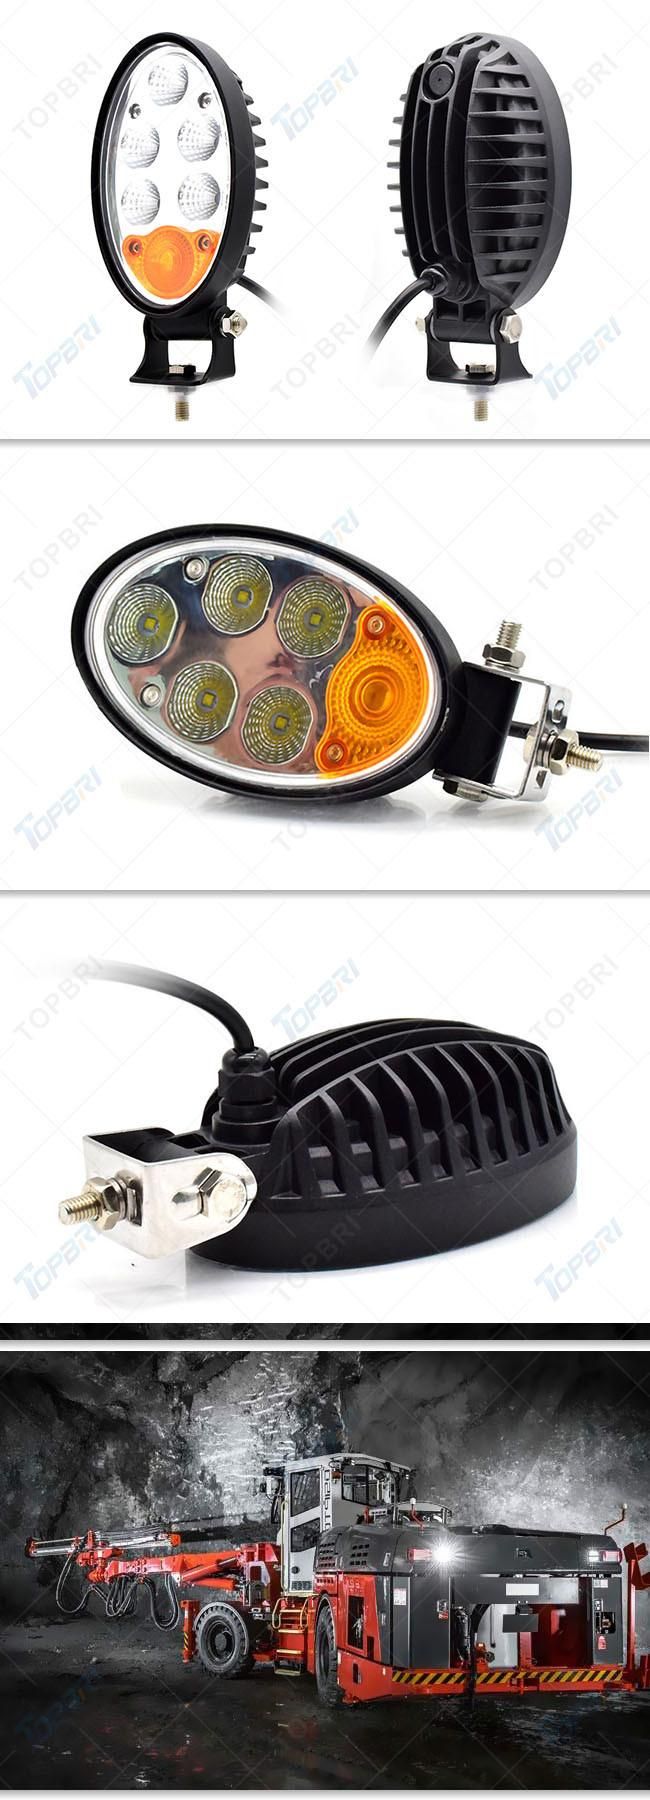 36W Oval LED Work Working Lamp for Tractor Forklift Truck